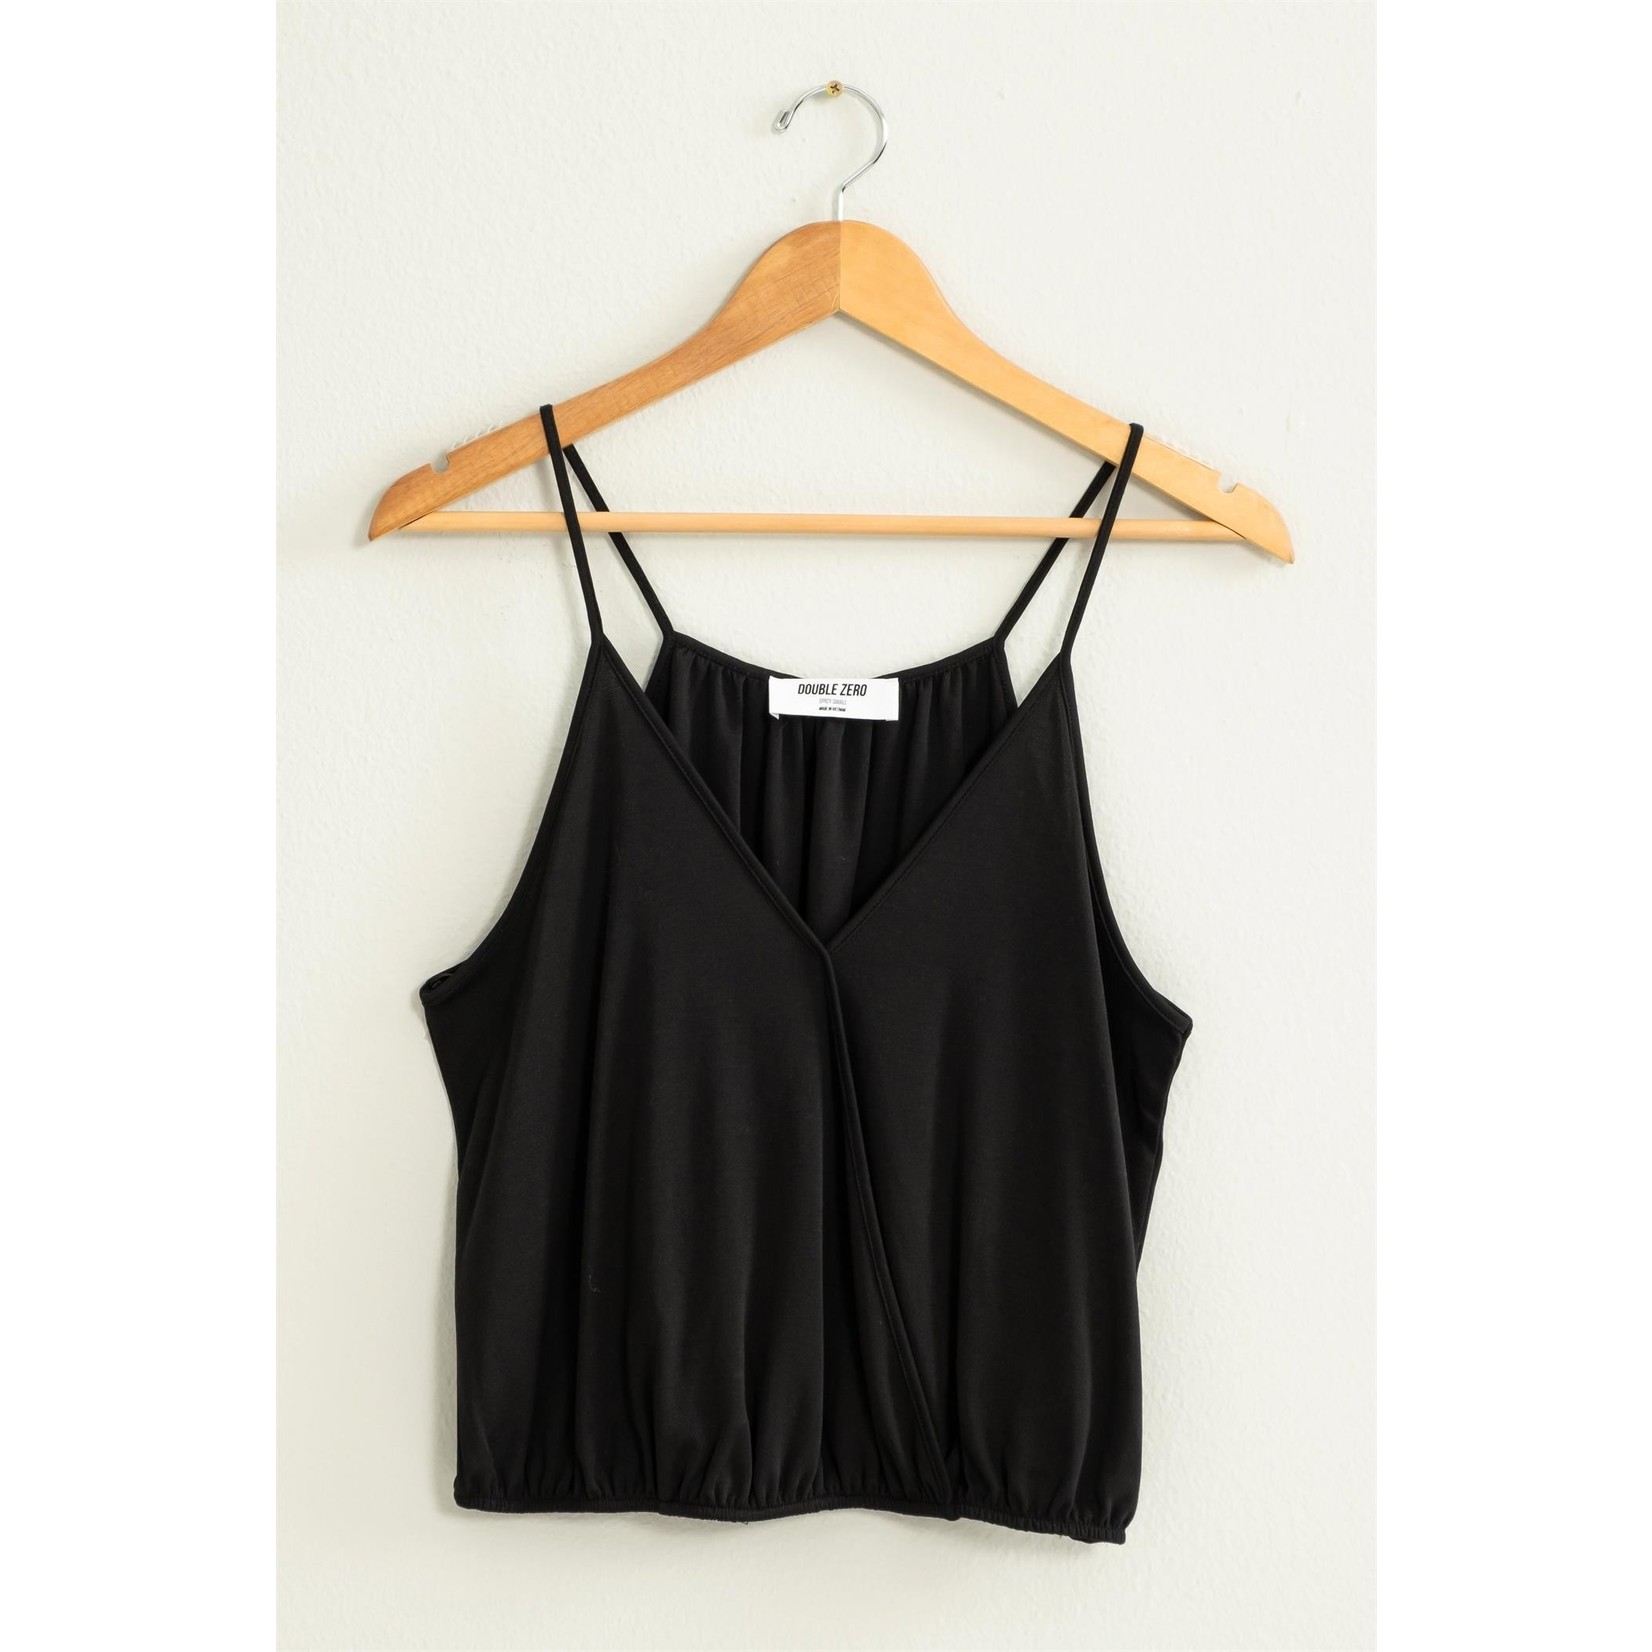 The All Play Cropped Cami